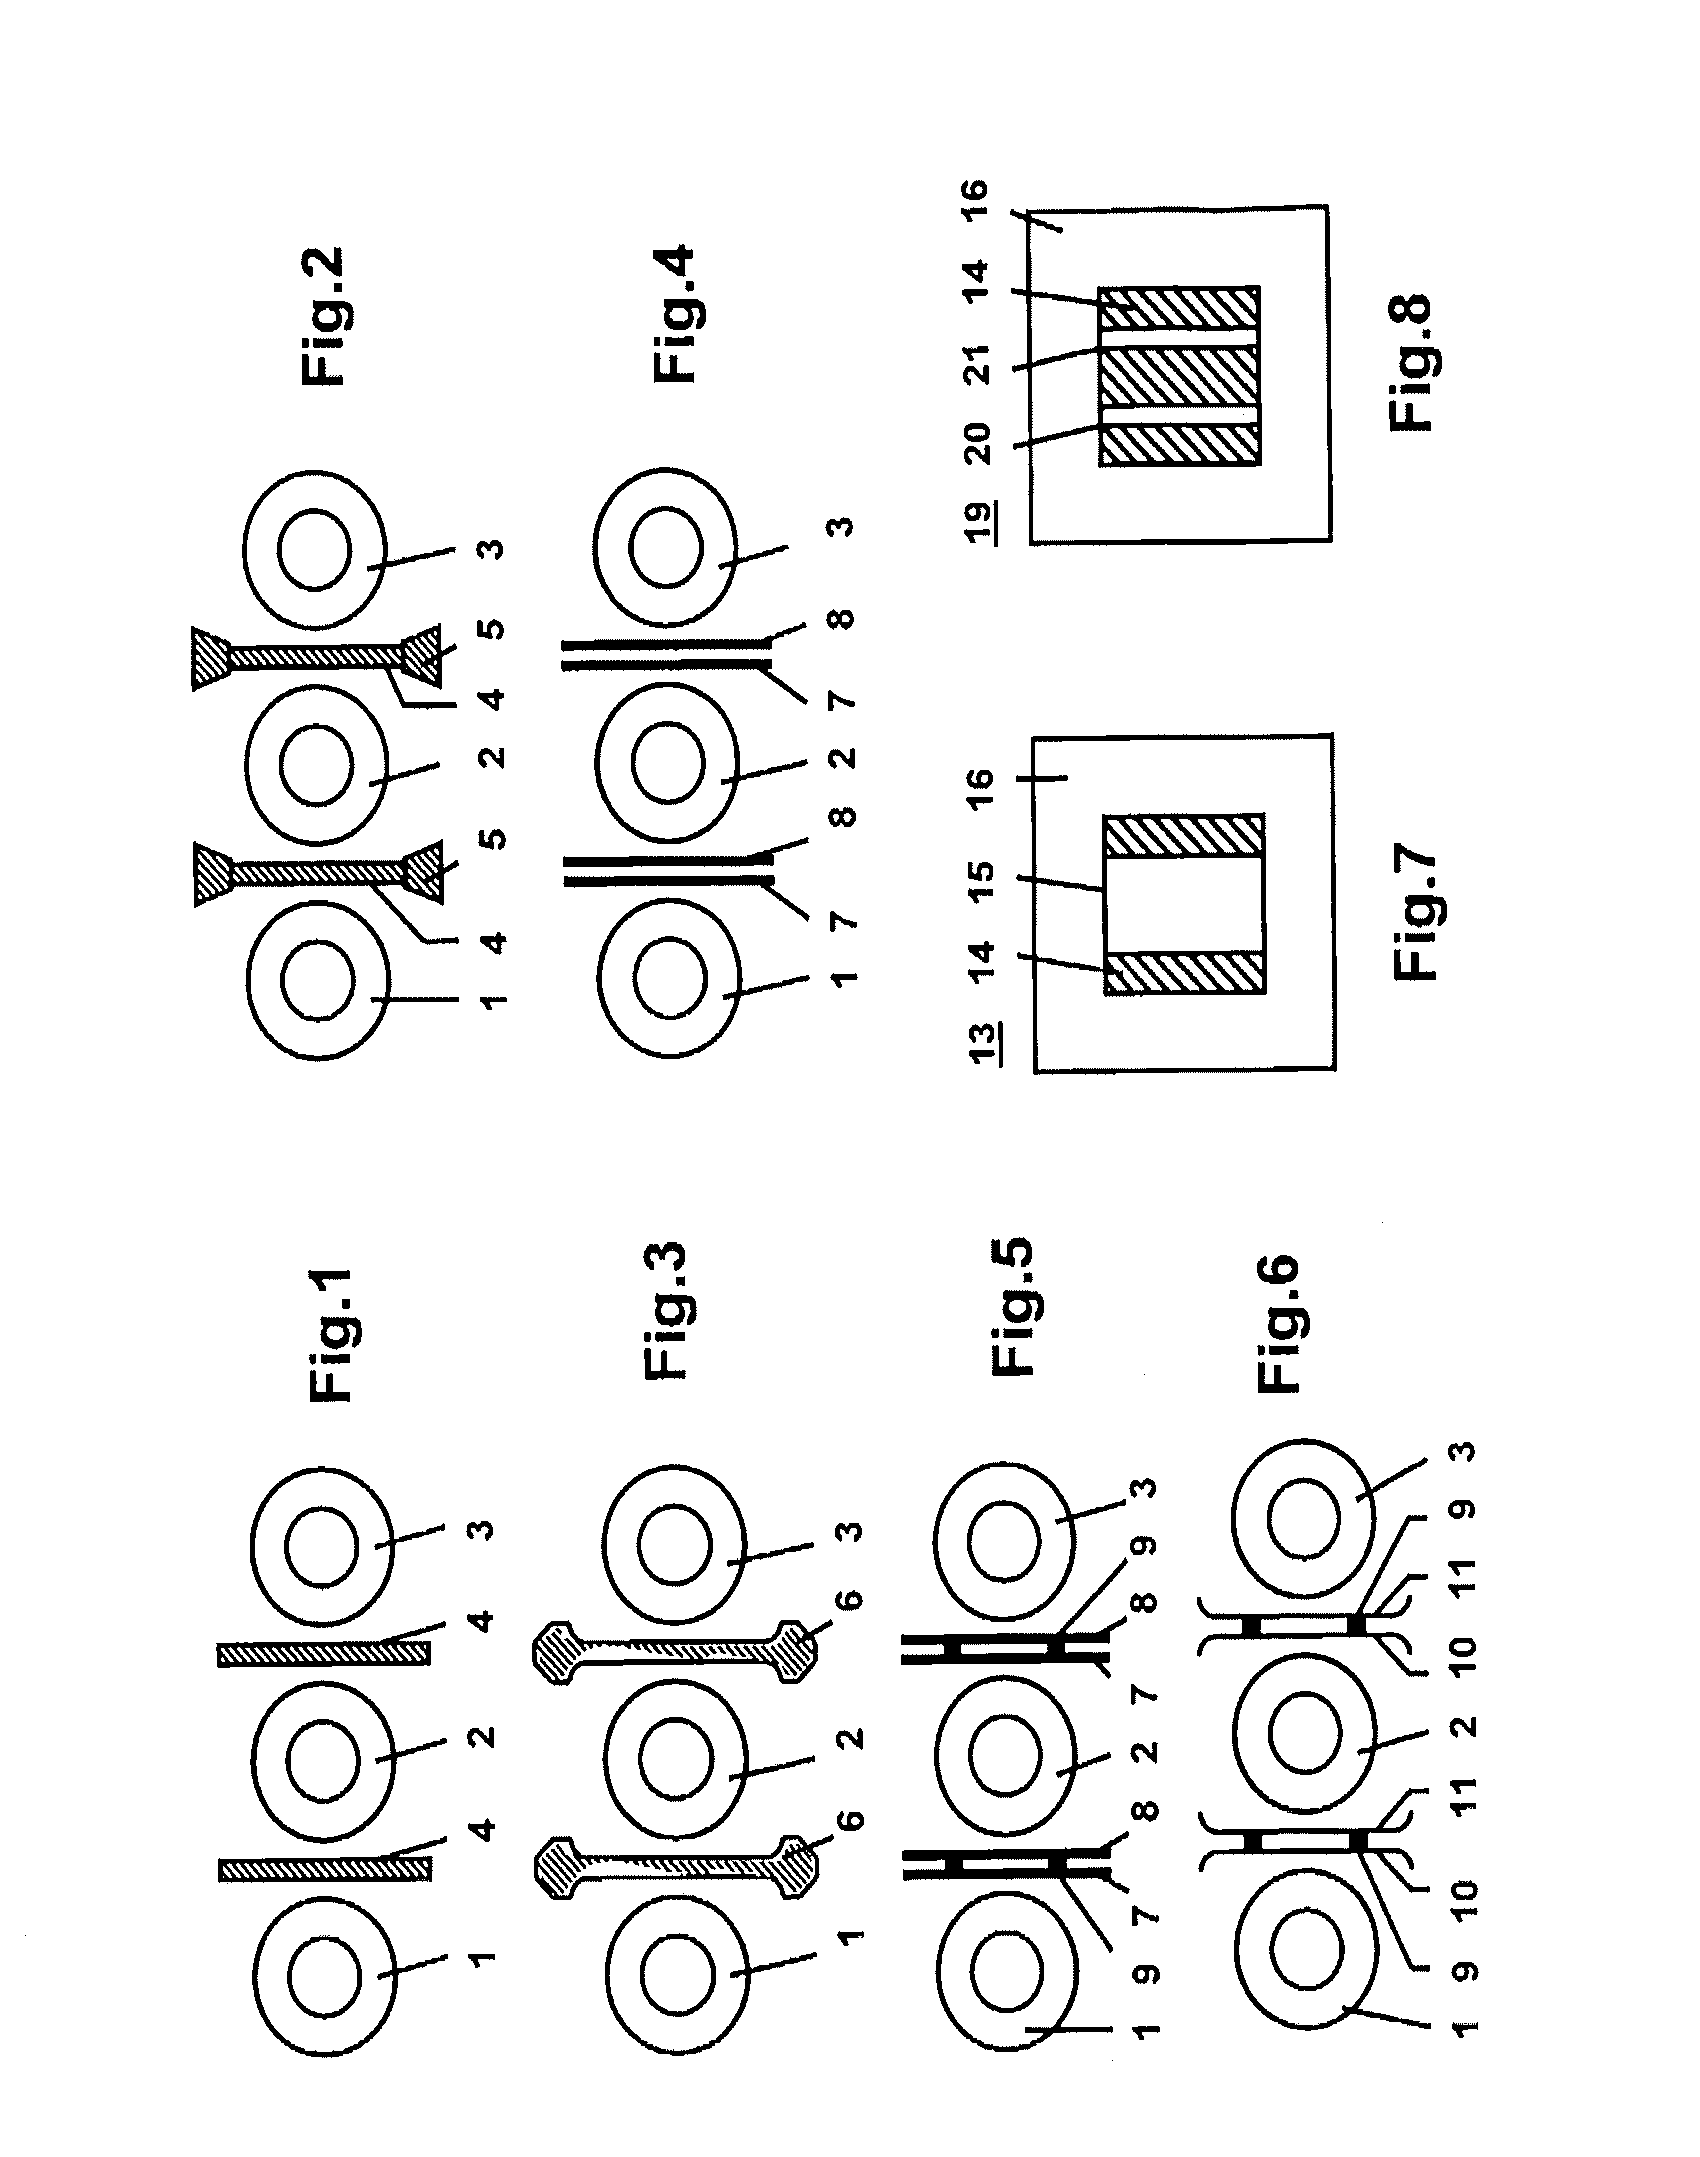 Single- or multi-phase dry-type transformer having at least two coils